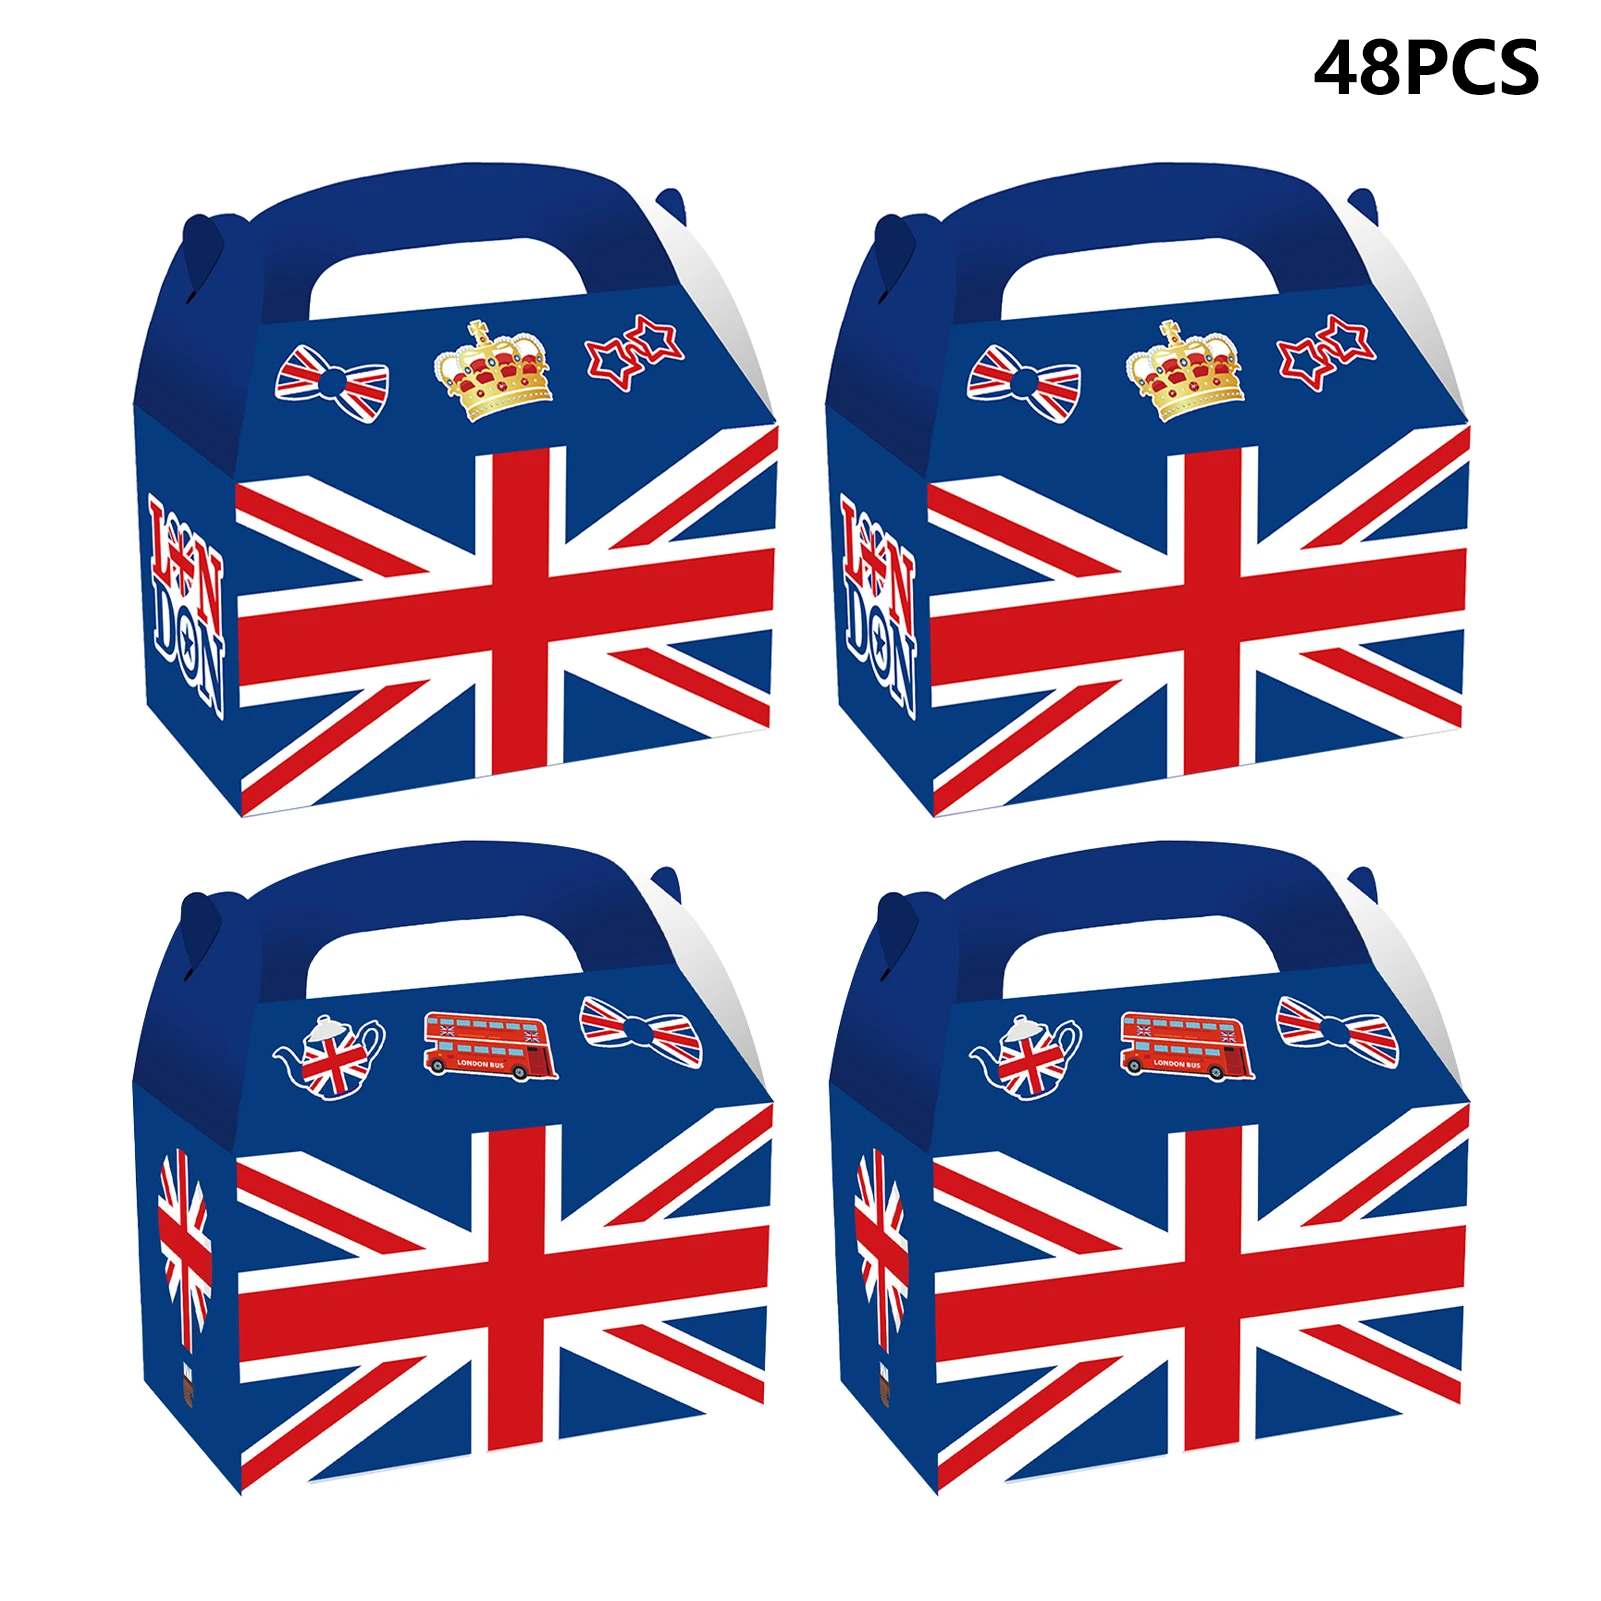 

48pcs Gifts Treat Boxes Union Jack Medium Decoration Royal Celebrations Party With Handle Cardboard UK Sport VE Day Lunch